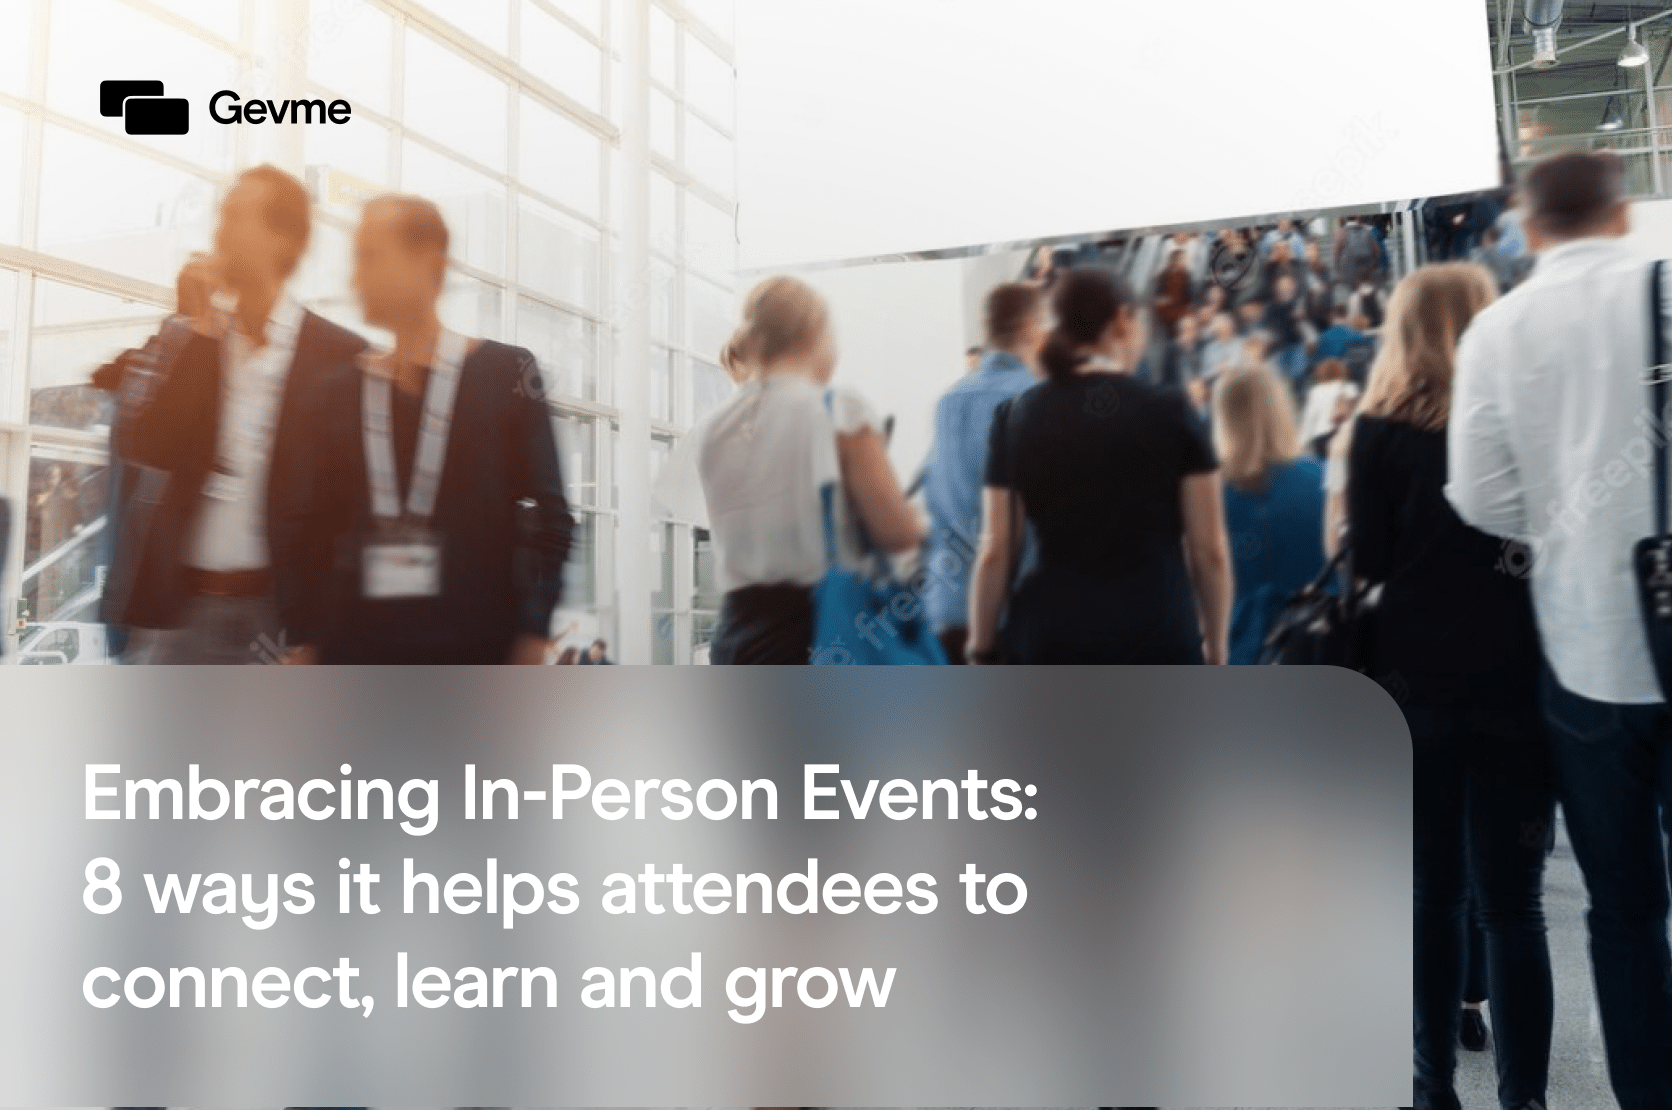 in-person events